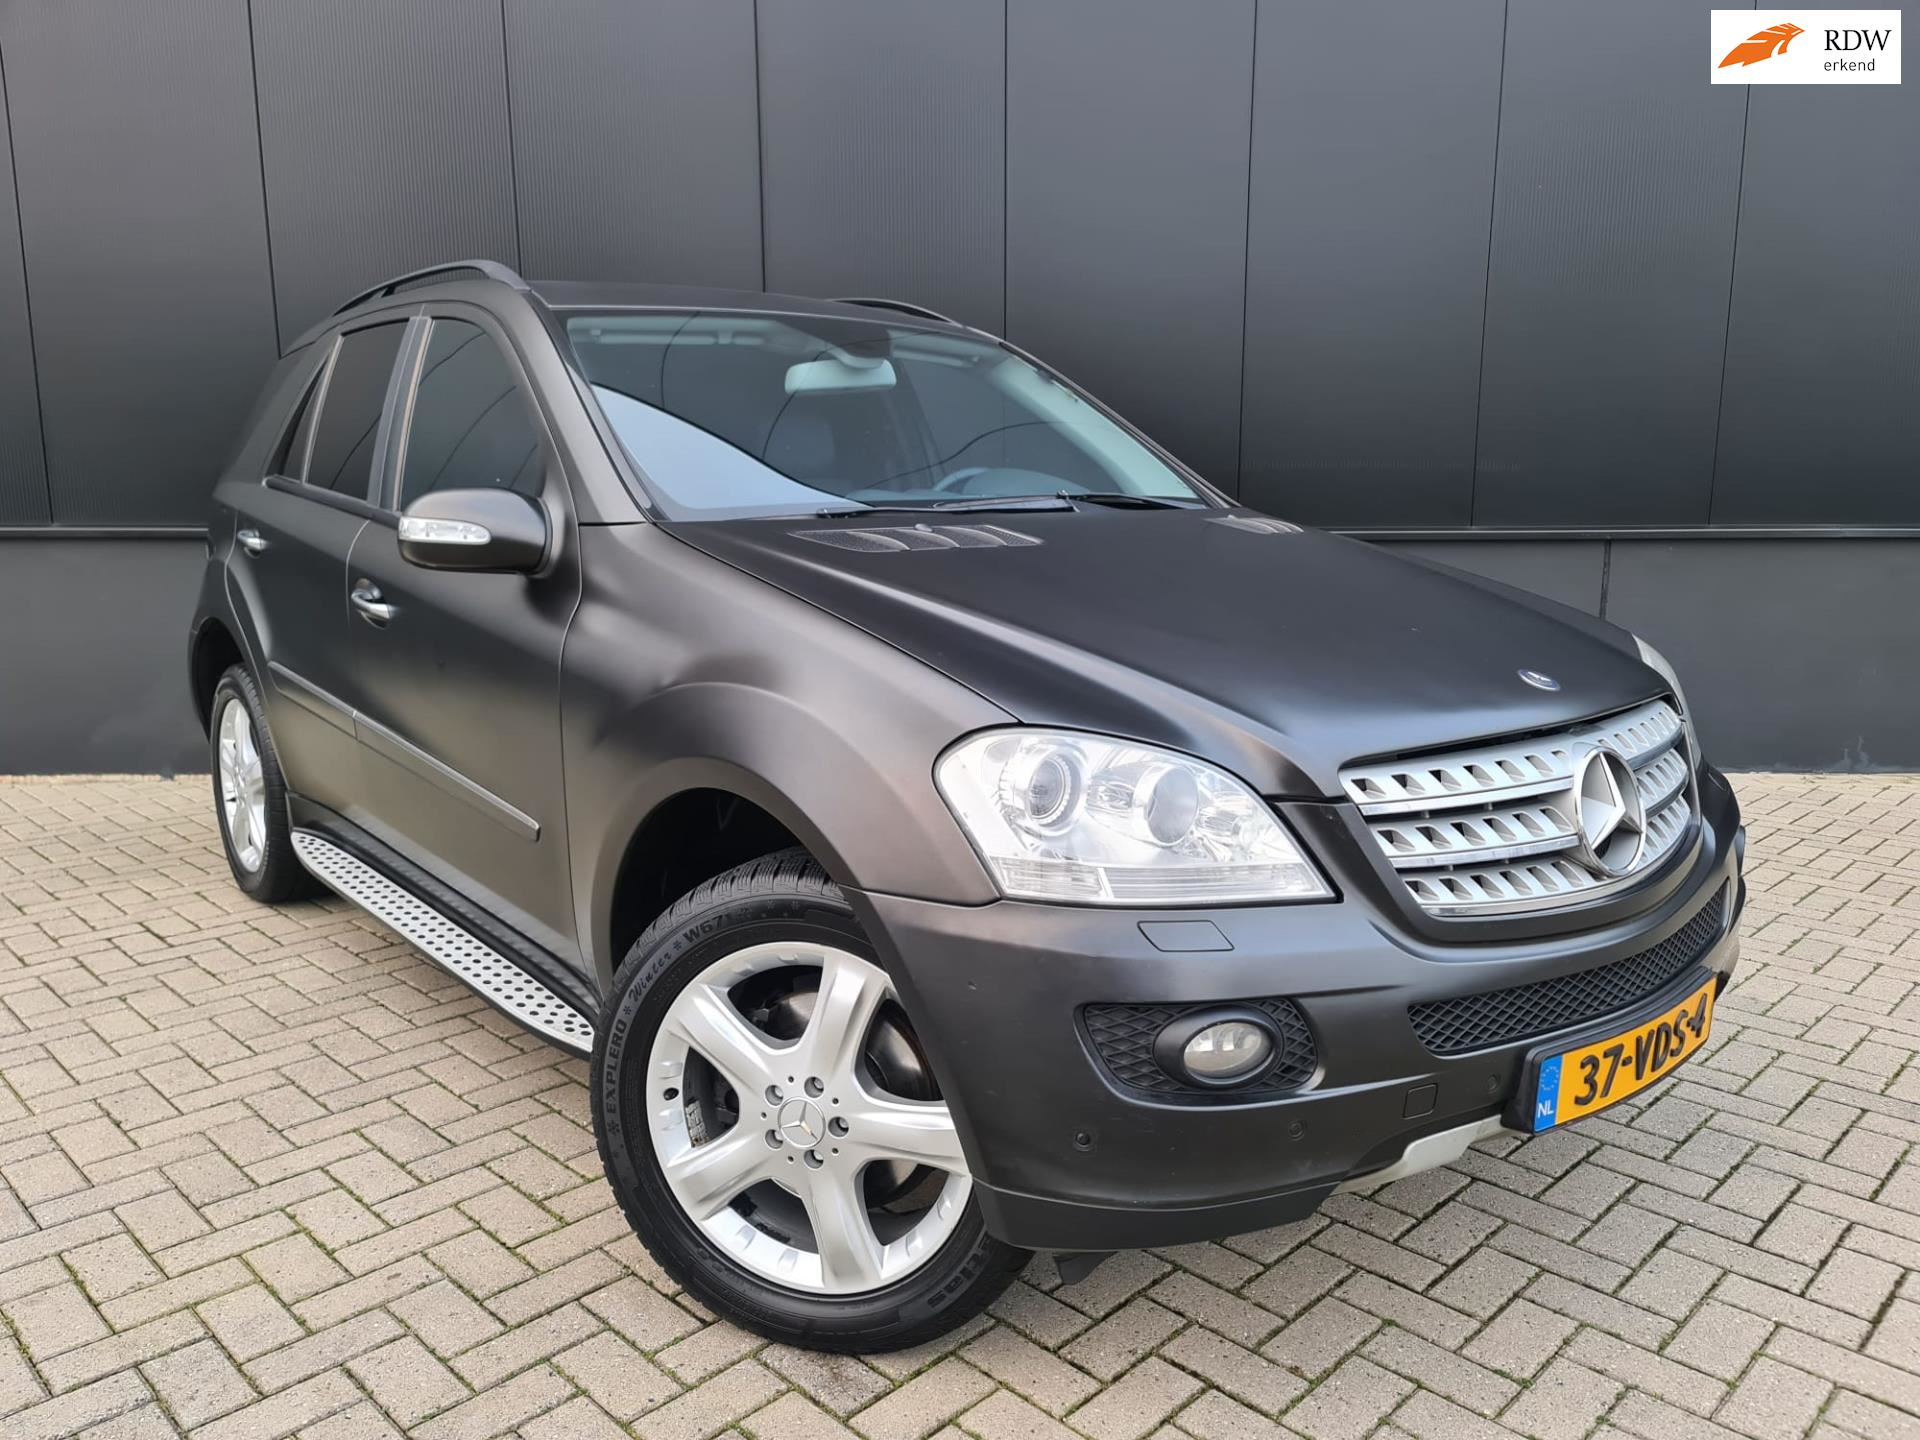 Mercedes-Benz ML 320 CDI 4MATIC occasion - Twin cars